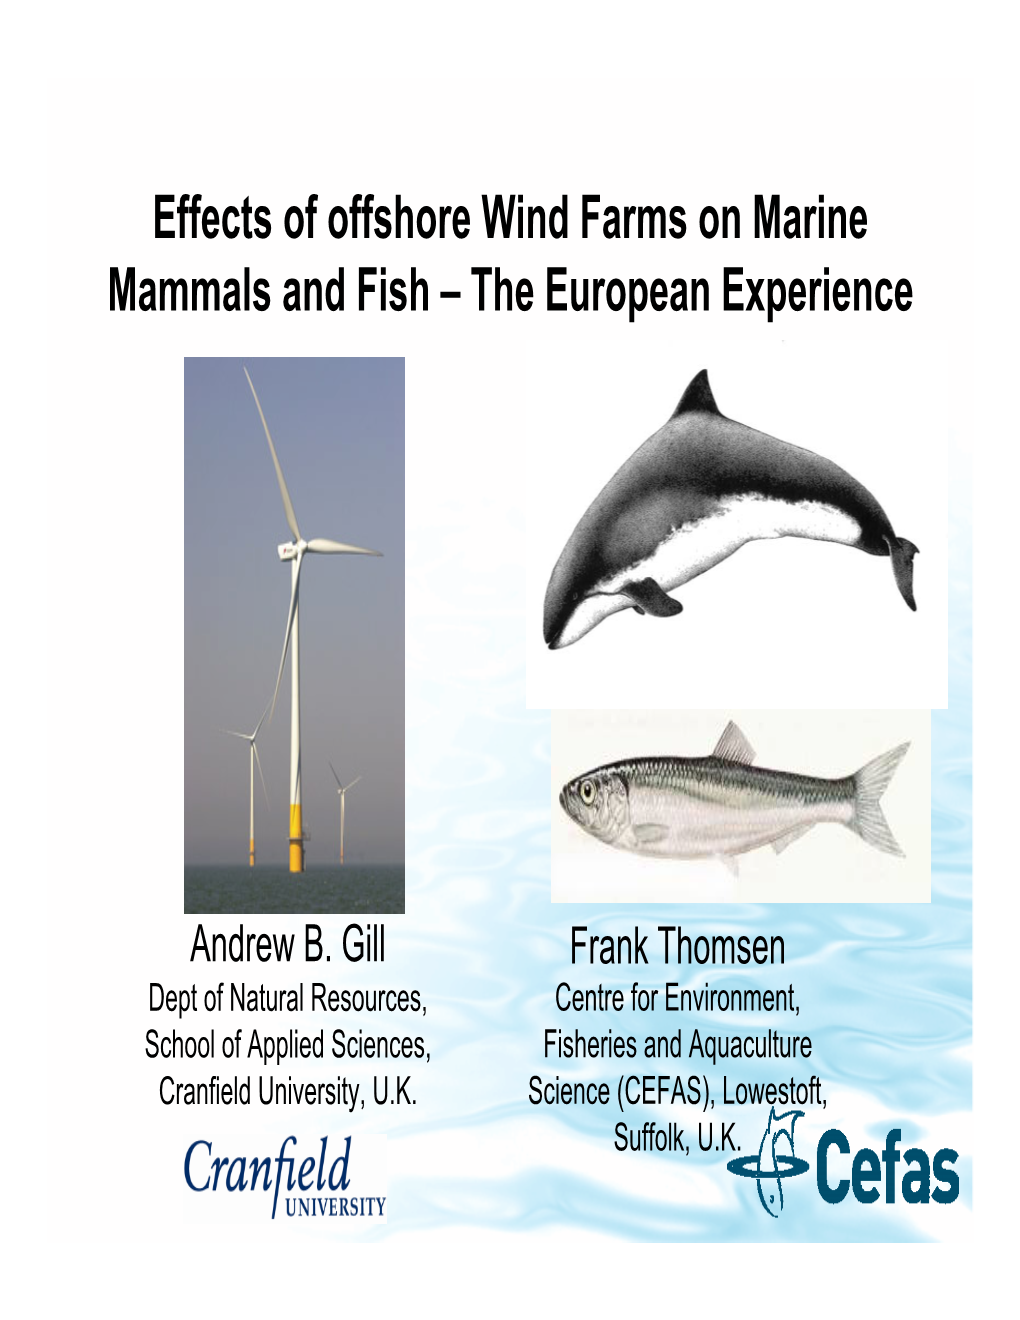 Effects of Offshore Wind Farms on Marine Mammals and Fish – the European Experience